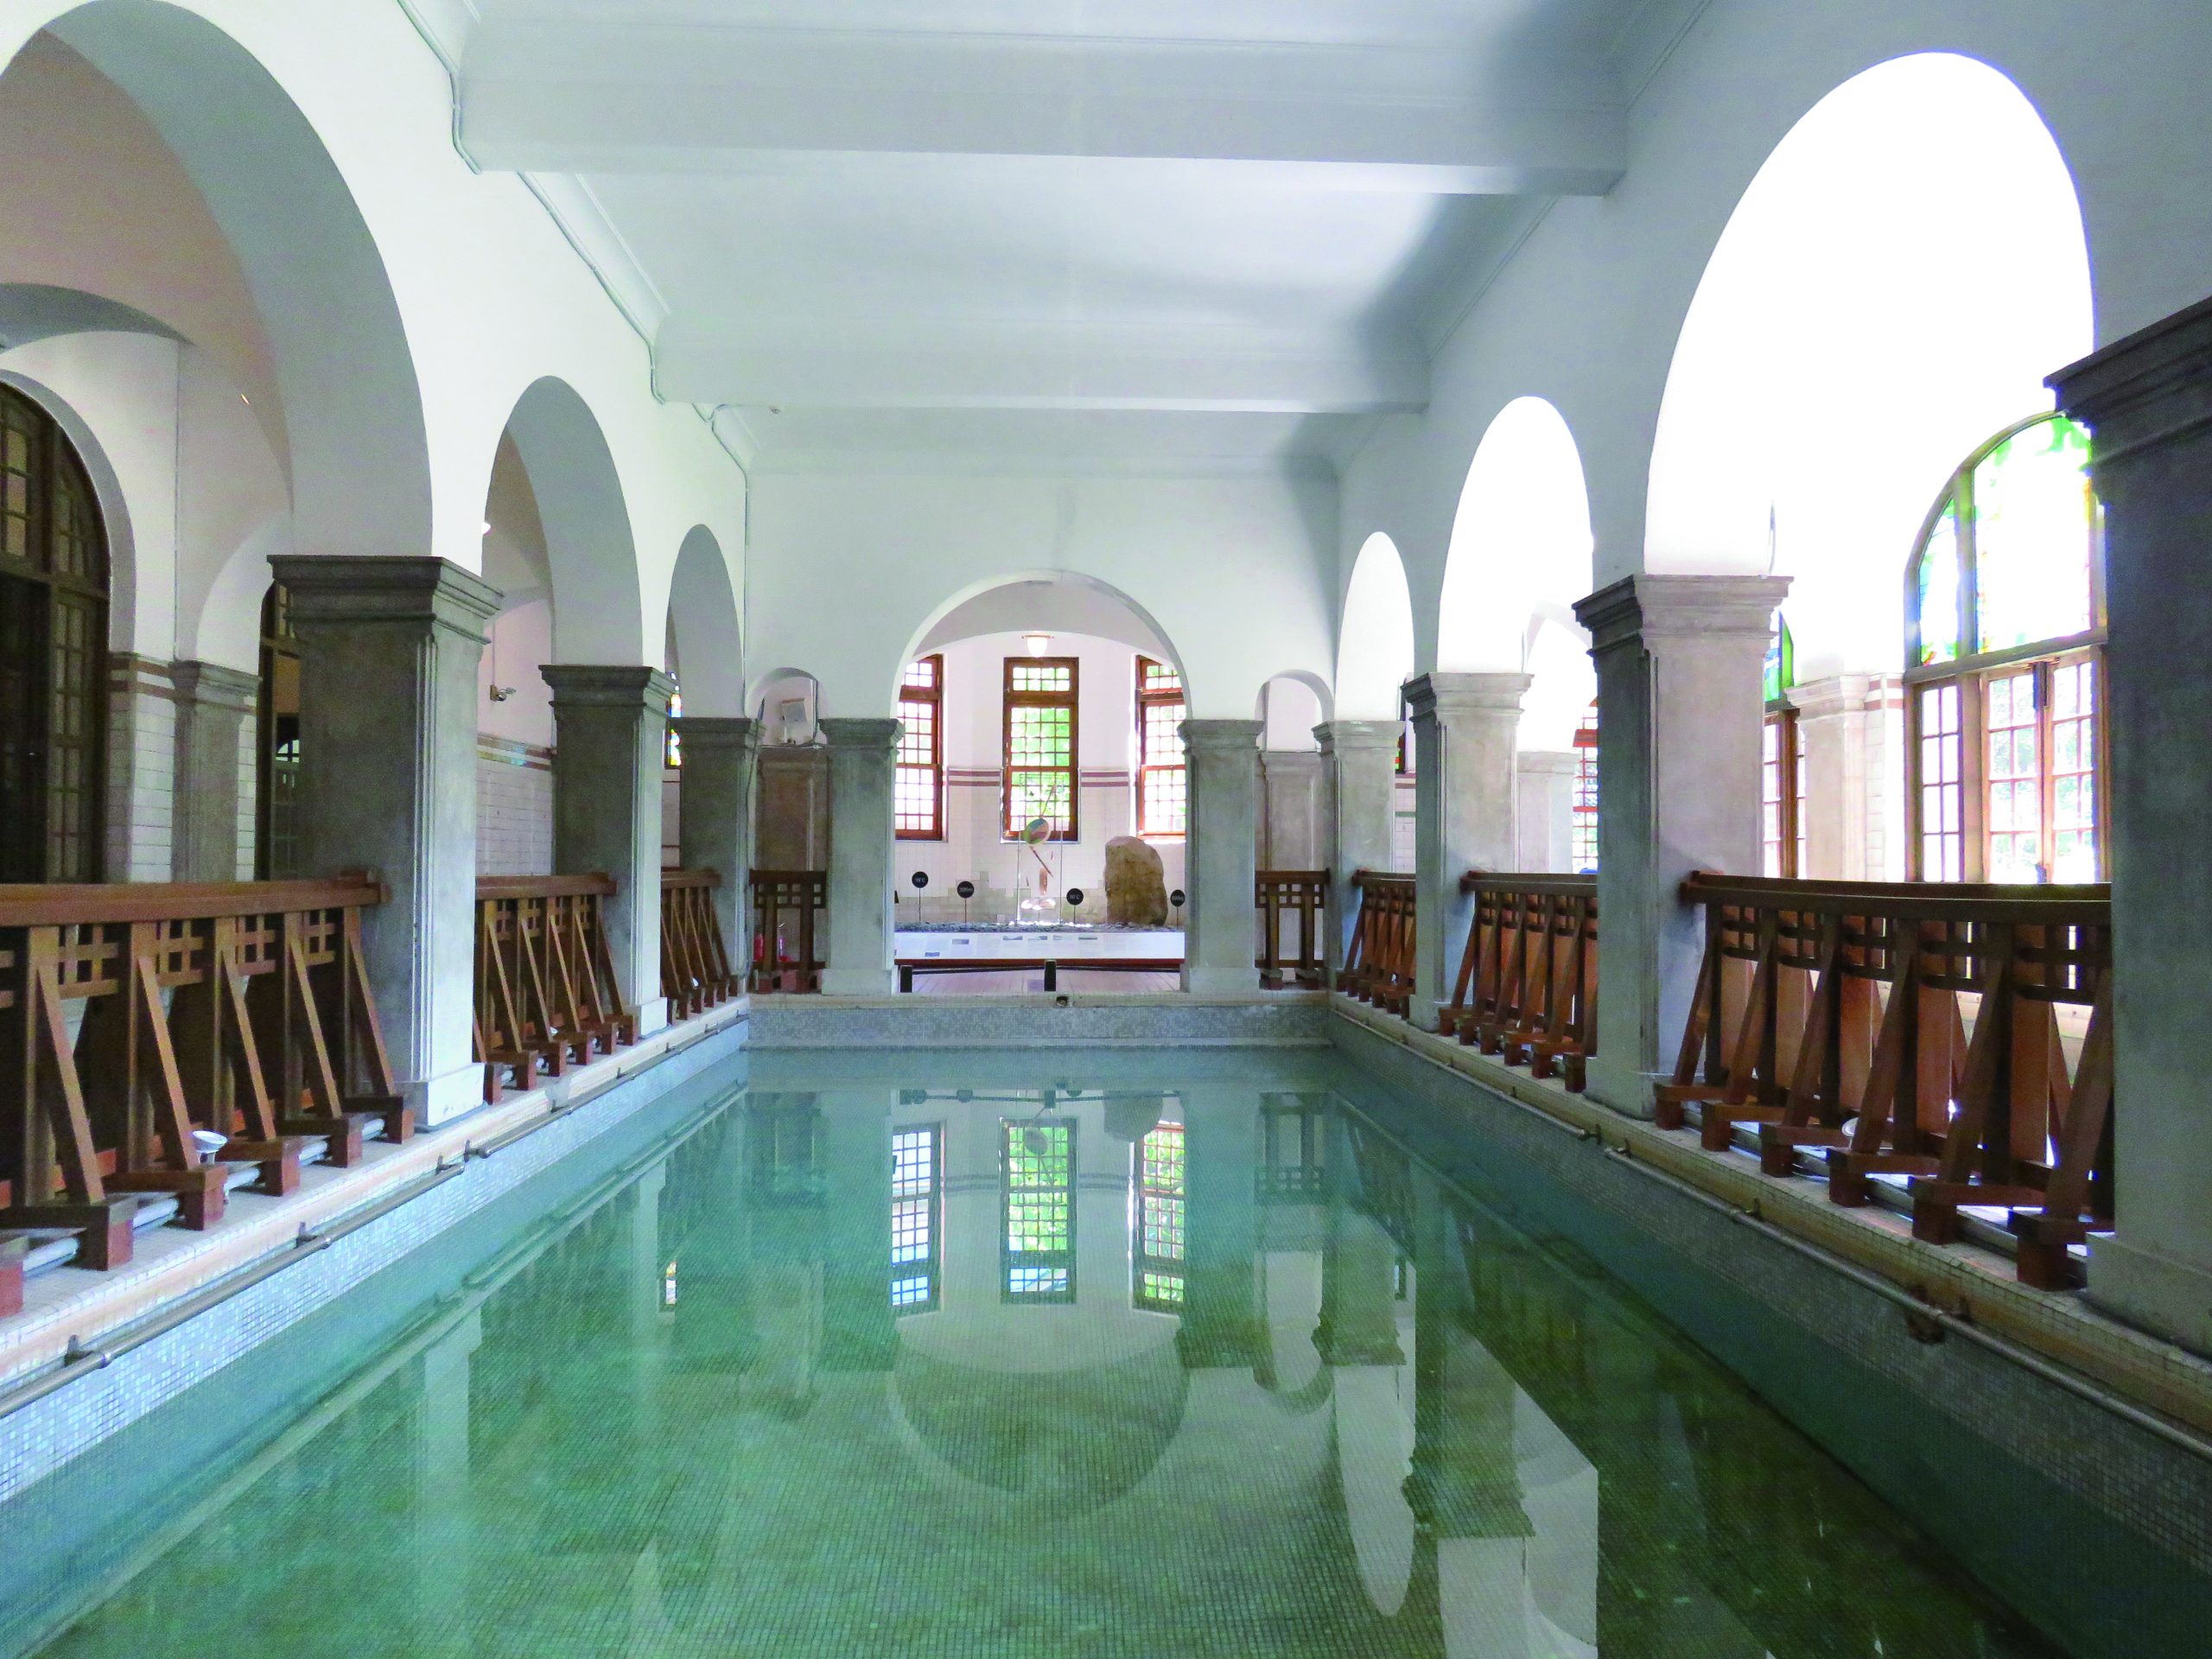 One distinctive feature within the Beitou Hot Spring Museum is the Roman-style grand bath, enclosed by round arches and columns. (Photo・Beitou Hot Spring Museum)